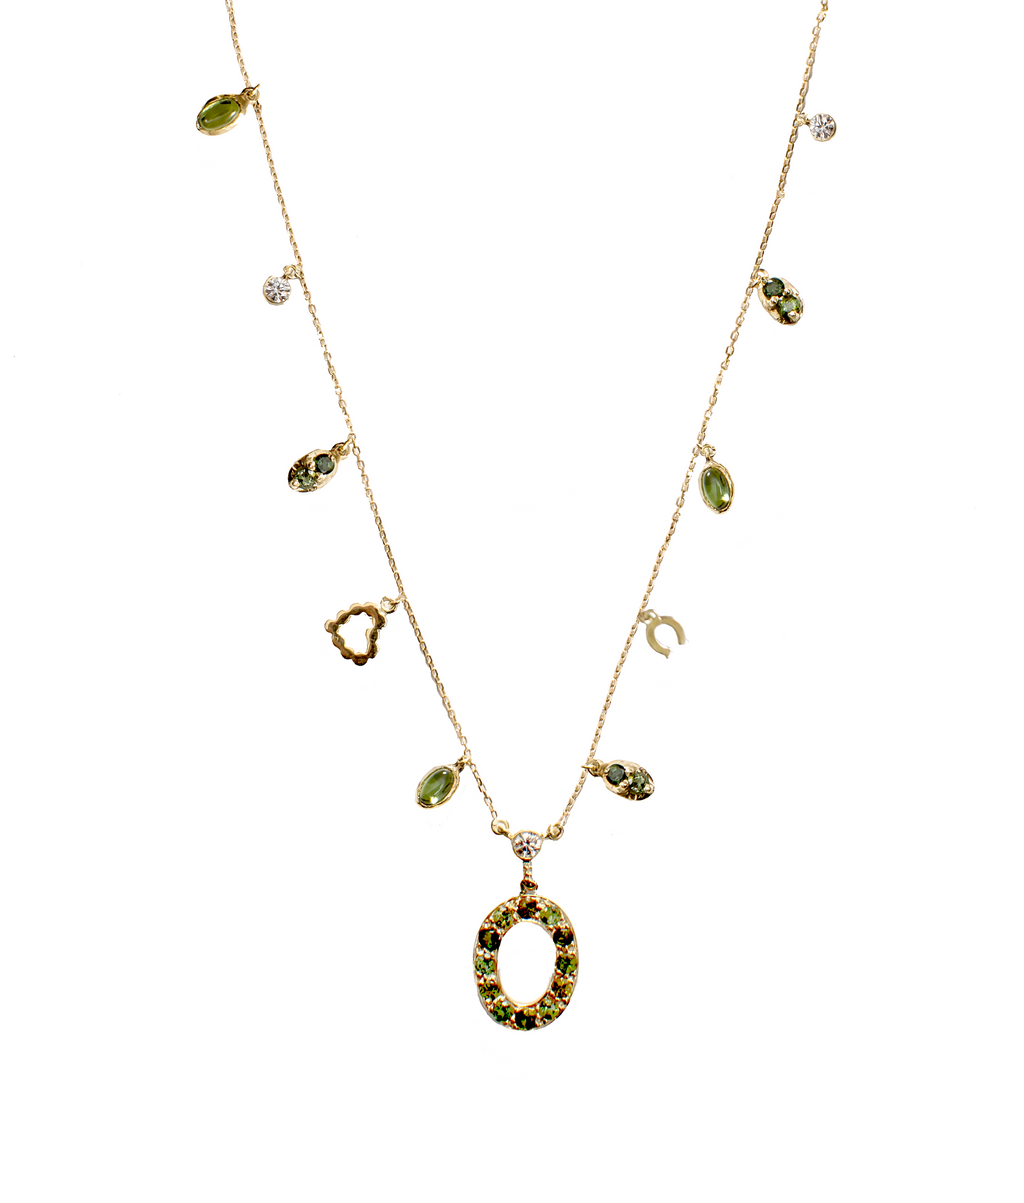 Long Tourmaline Necklace With Diamonds And Green Tourmaline Charm Drops